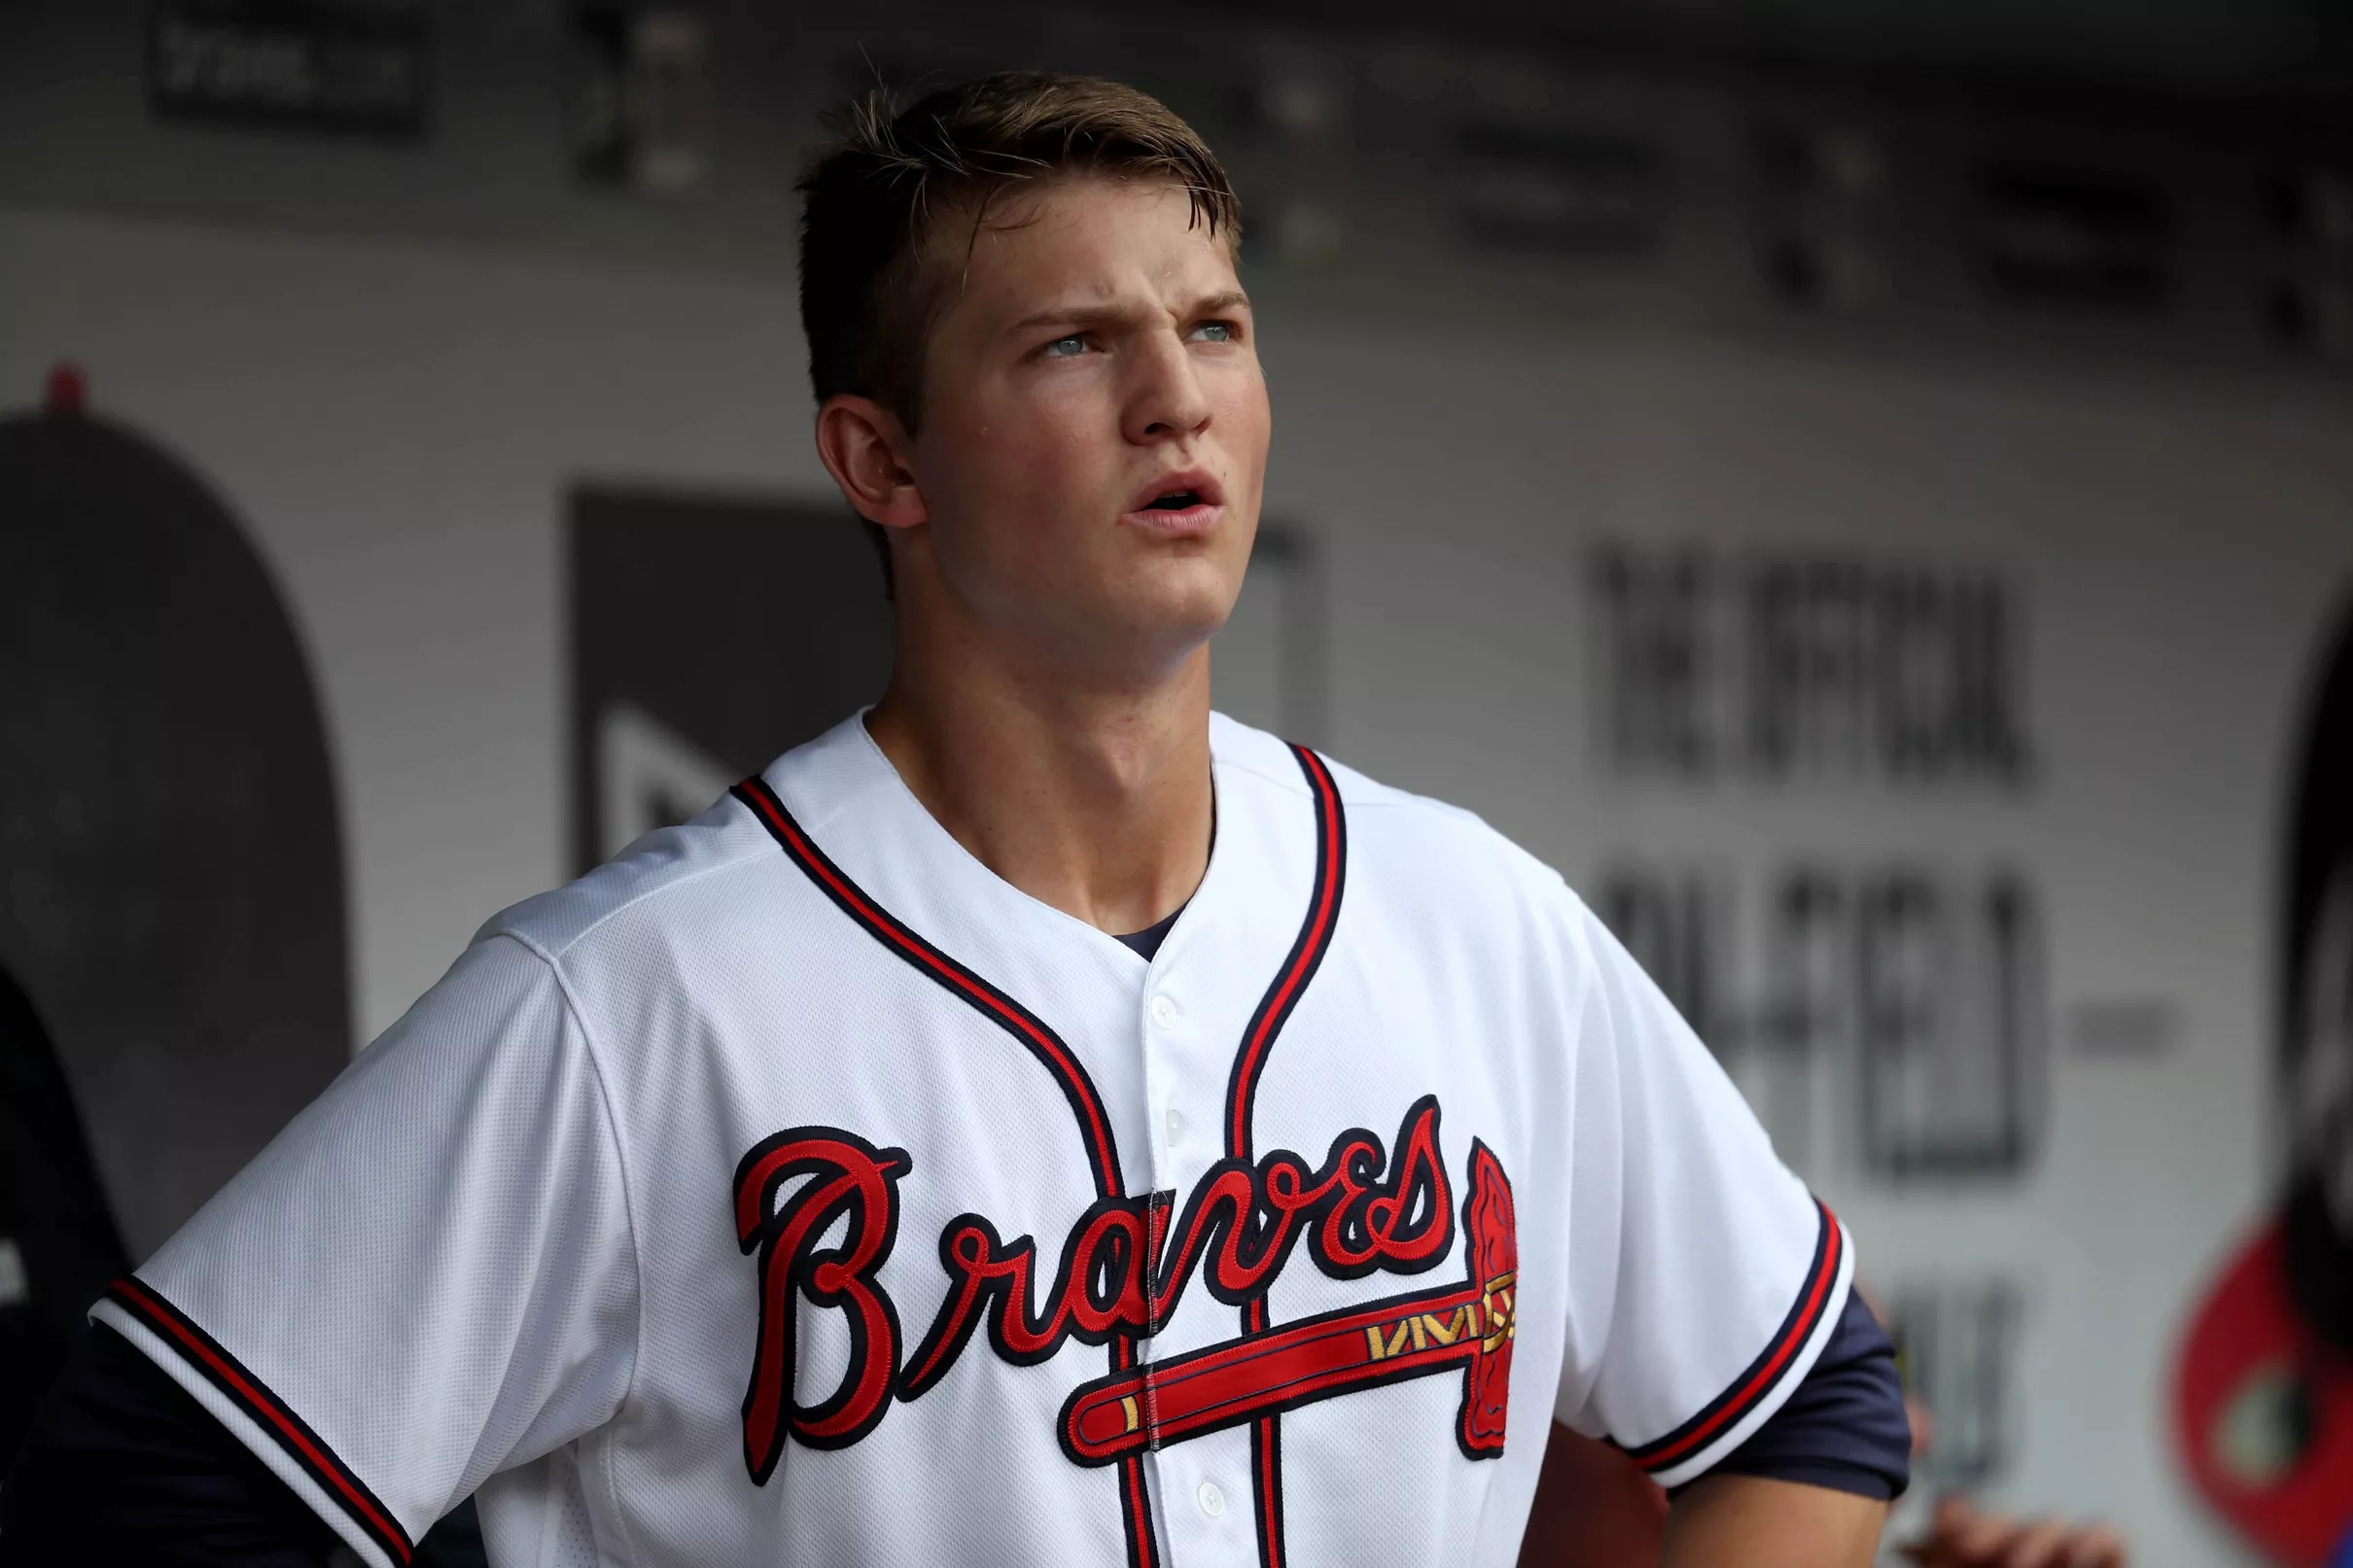 News of a setback in Mike Soroka’s recovery could alter Braves’ plans ...